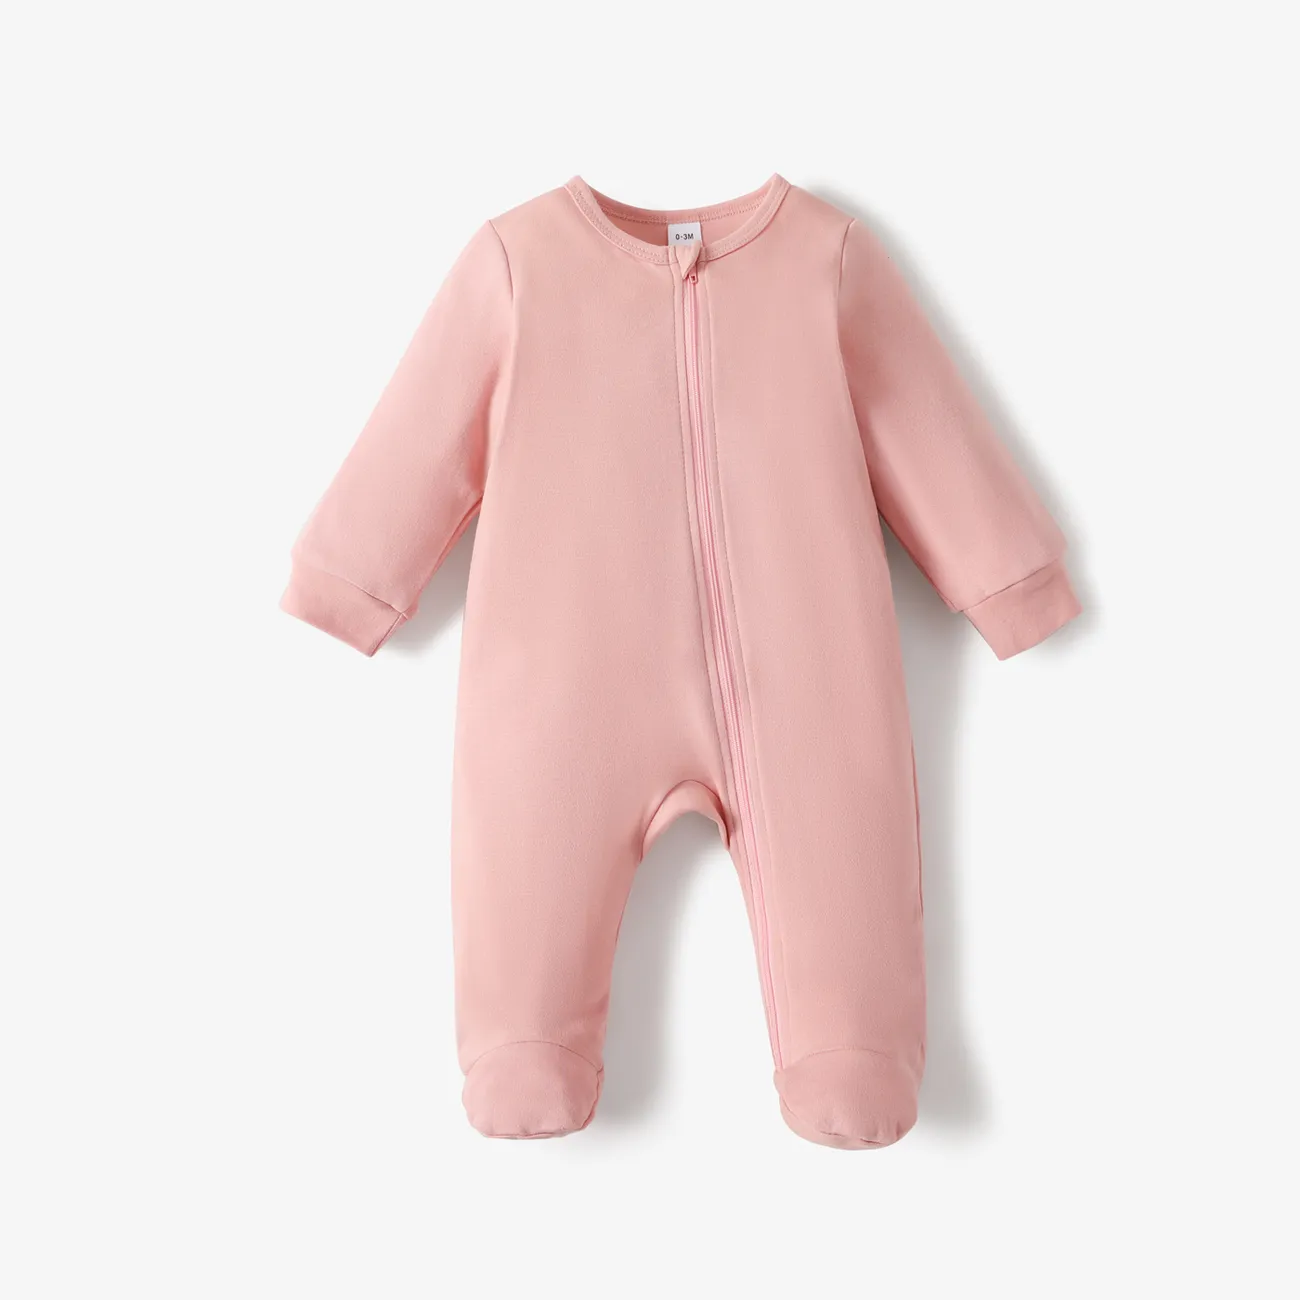 Multi Color Solid Footed/footie Long-sleeve Baby Jumpsuit Light Pink big image 1